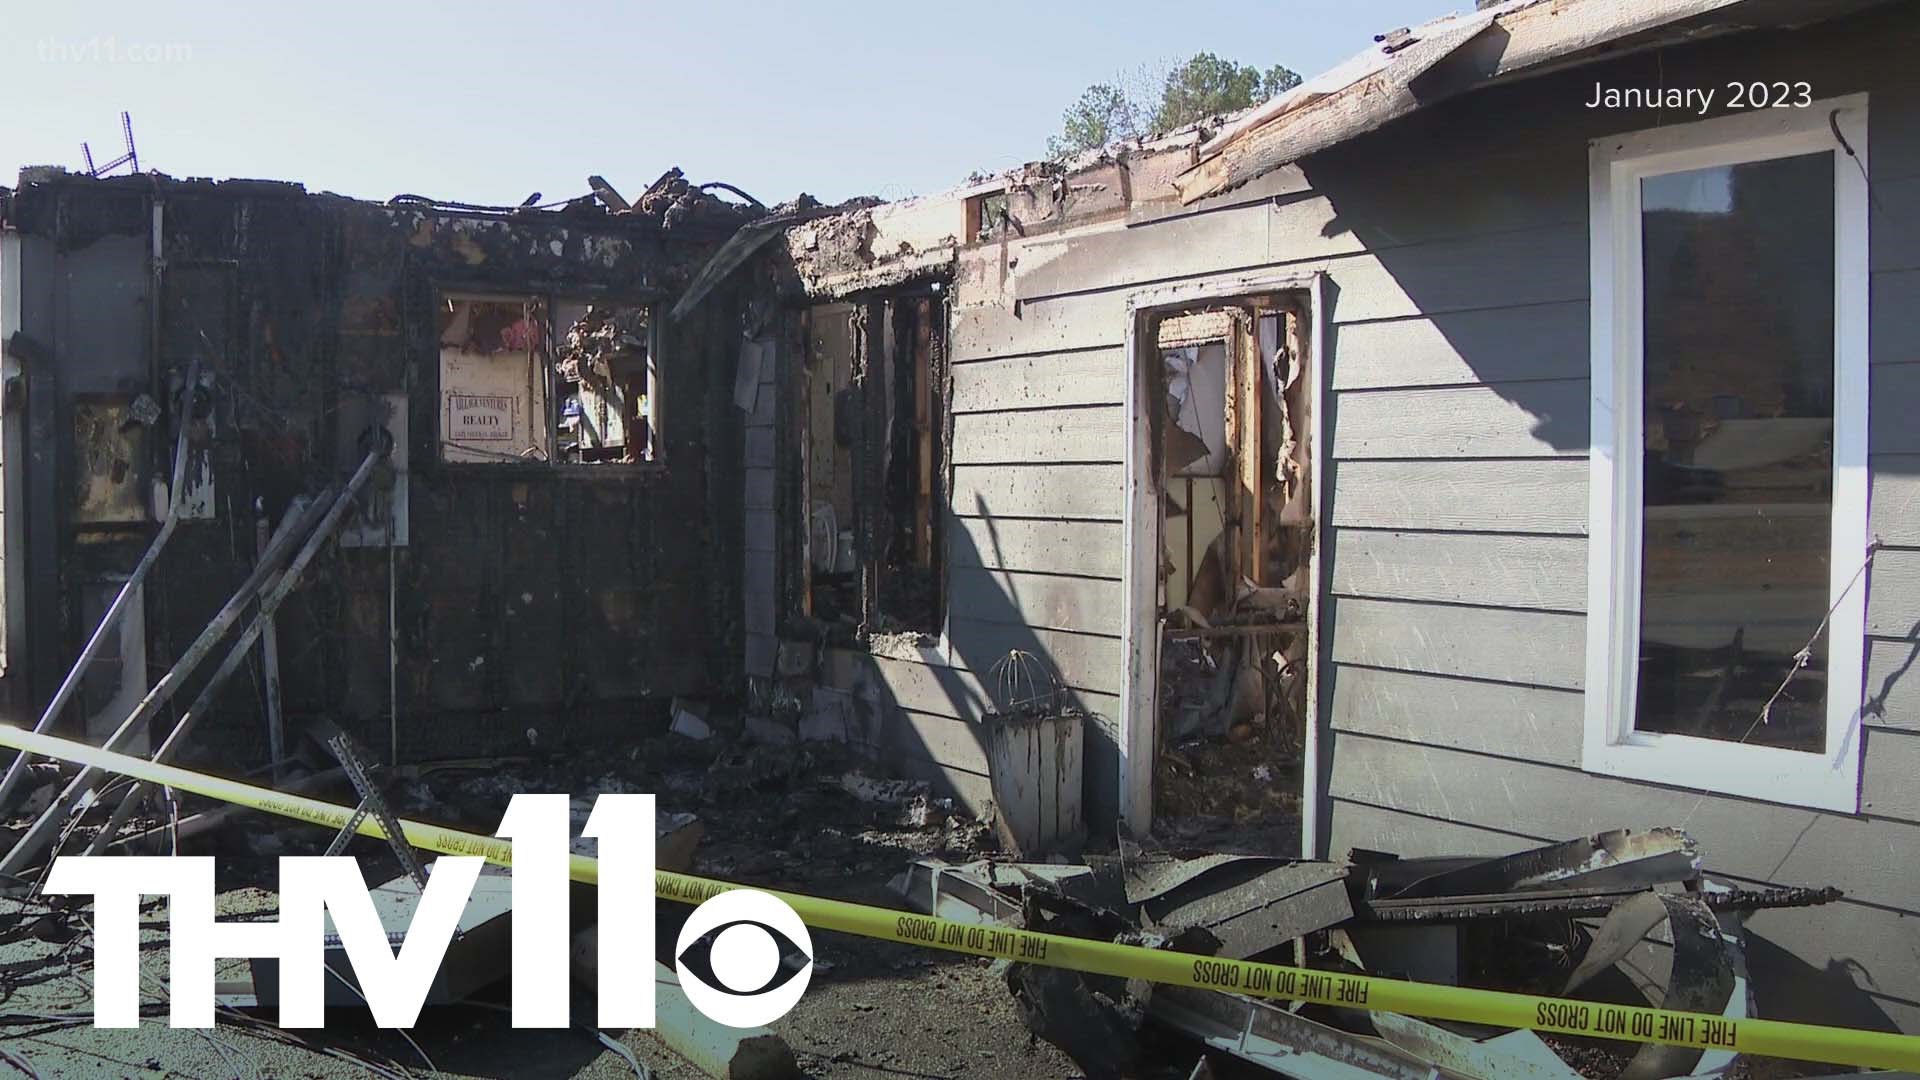 It's been two months since a fire damaged businesses in Hot Springs Village. Community members helped spa owner Christian Bearden get back on her feet.